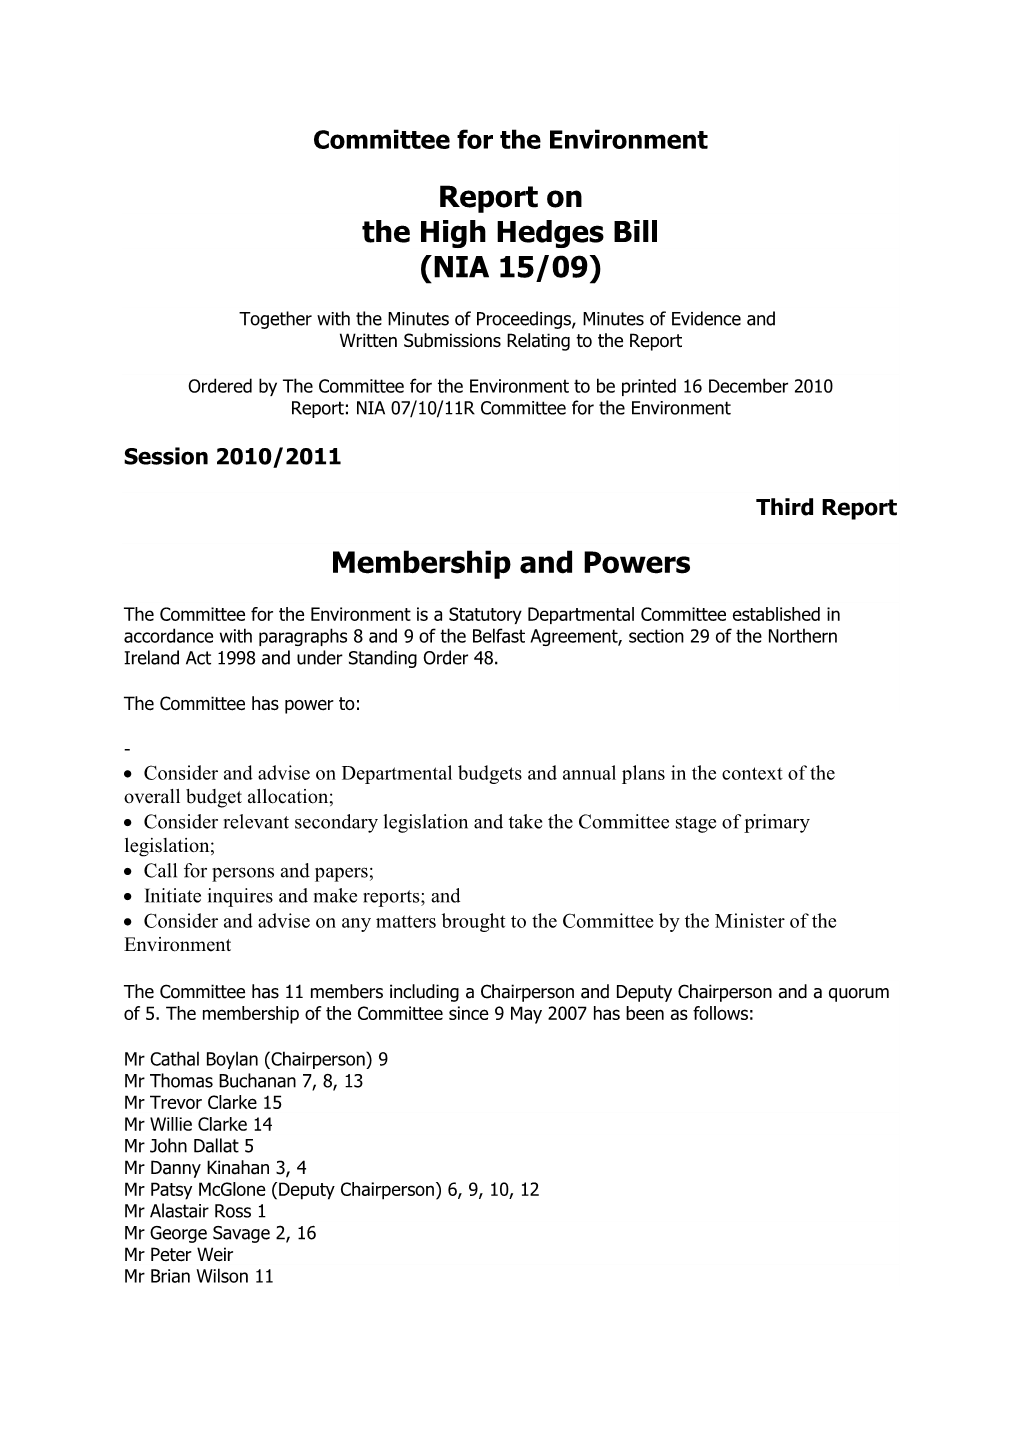 Report on the High Hedges Bill (NIA 15/09) Membership and Powers